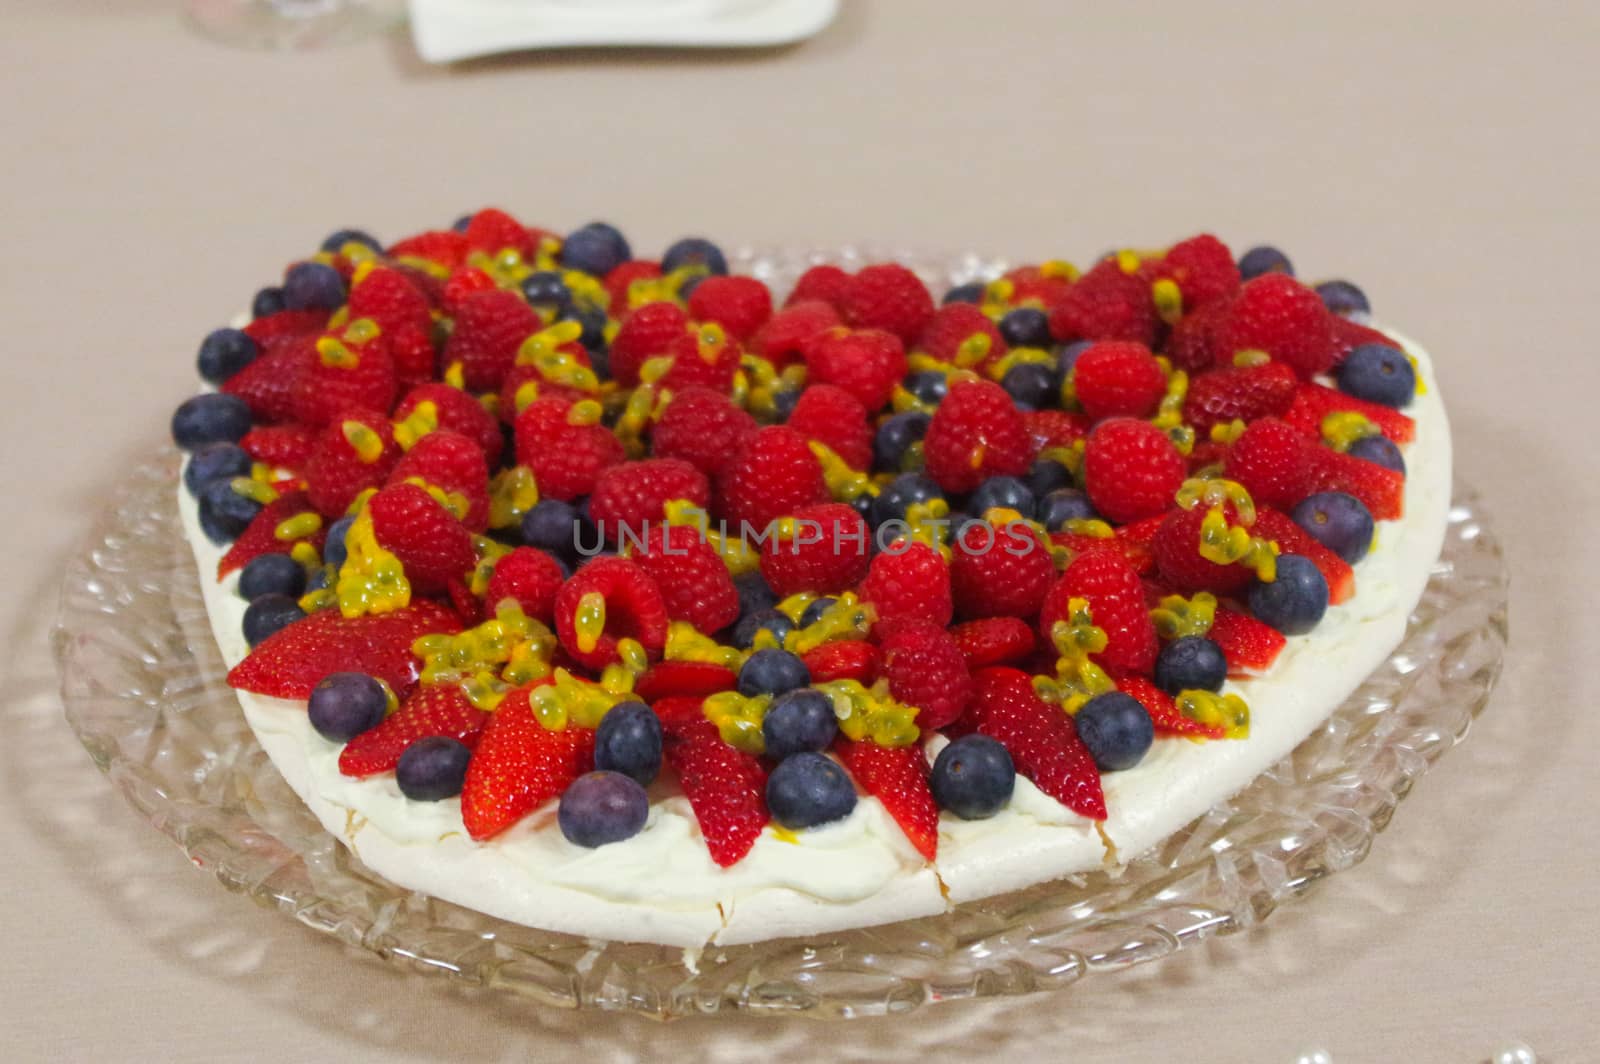 homemade cake with Strawberries and blueberries for Valentine's Day heart shaped on a glas plate   tablecloth by evolutionnow